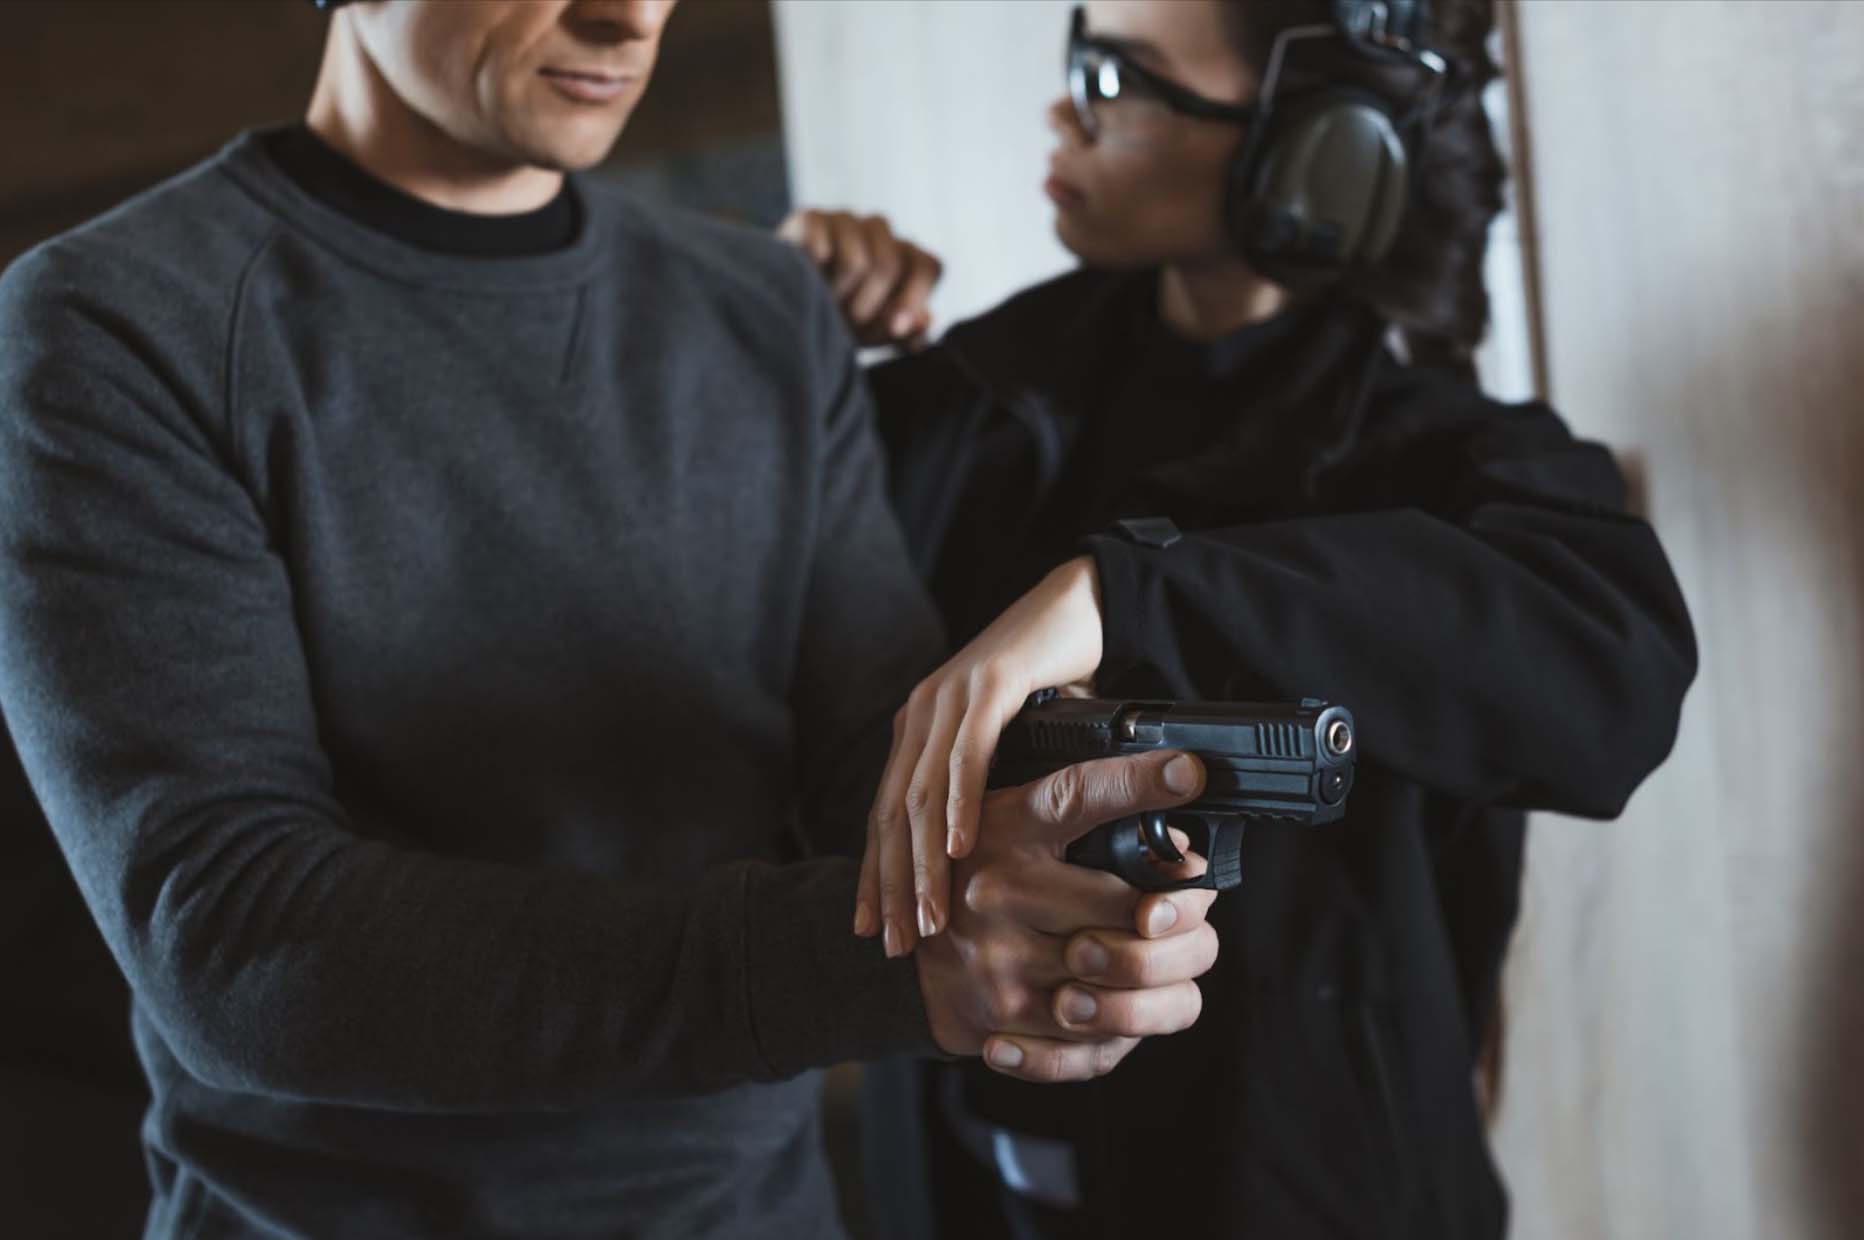 Female instructor helping a man who is holding a gun.